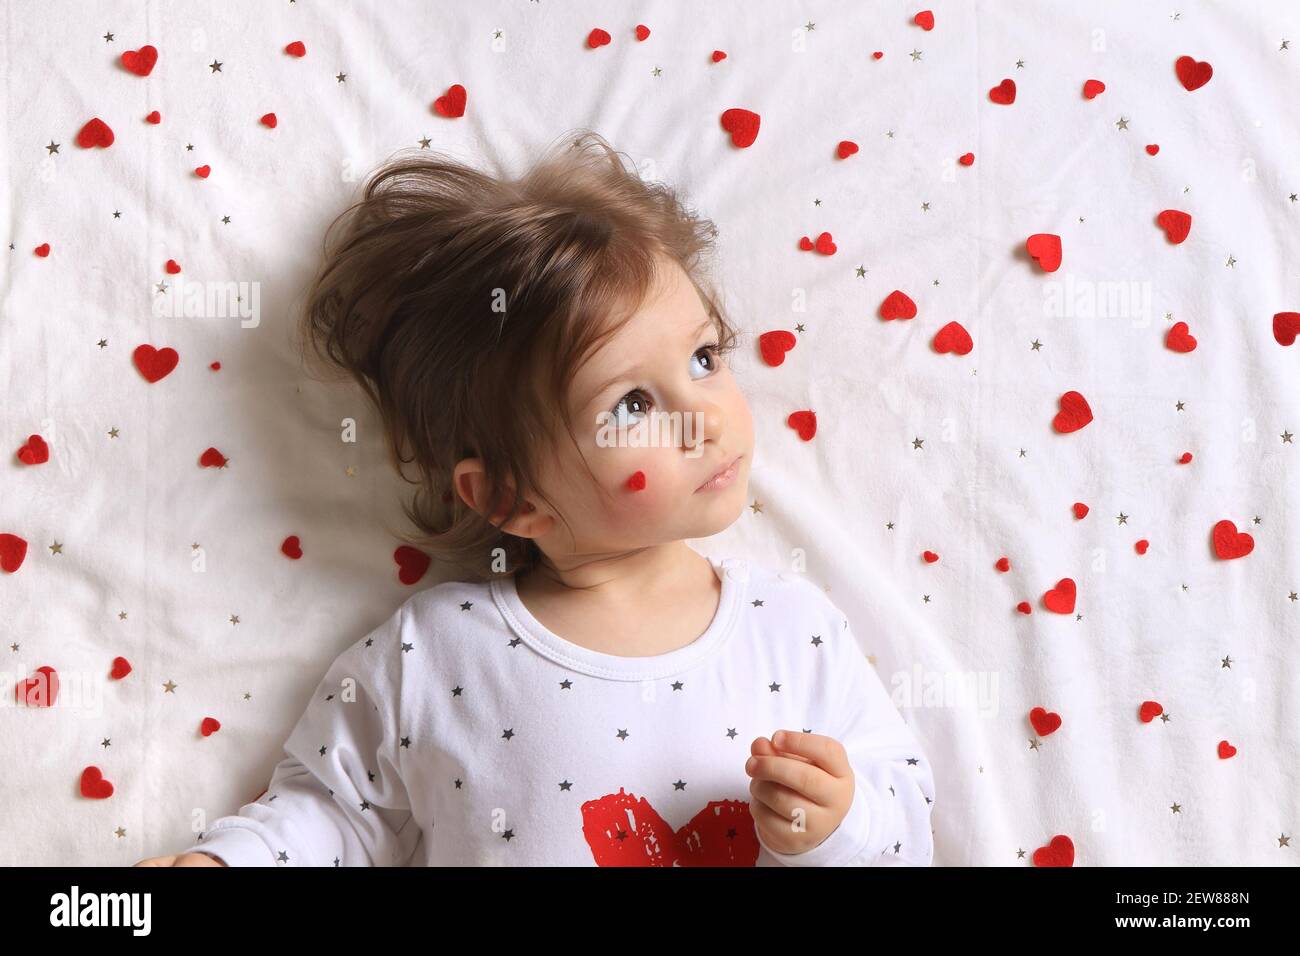 A toddler with lots of red hearts surrounding him on white. Stock Photo